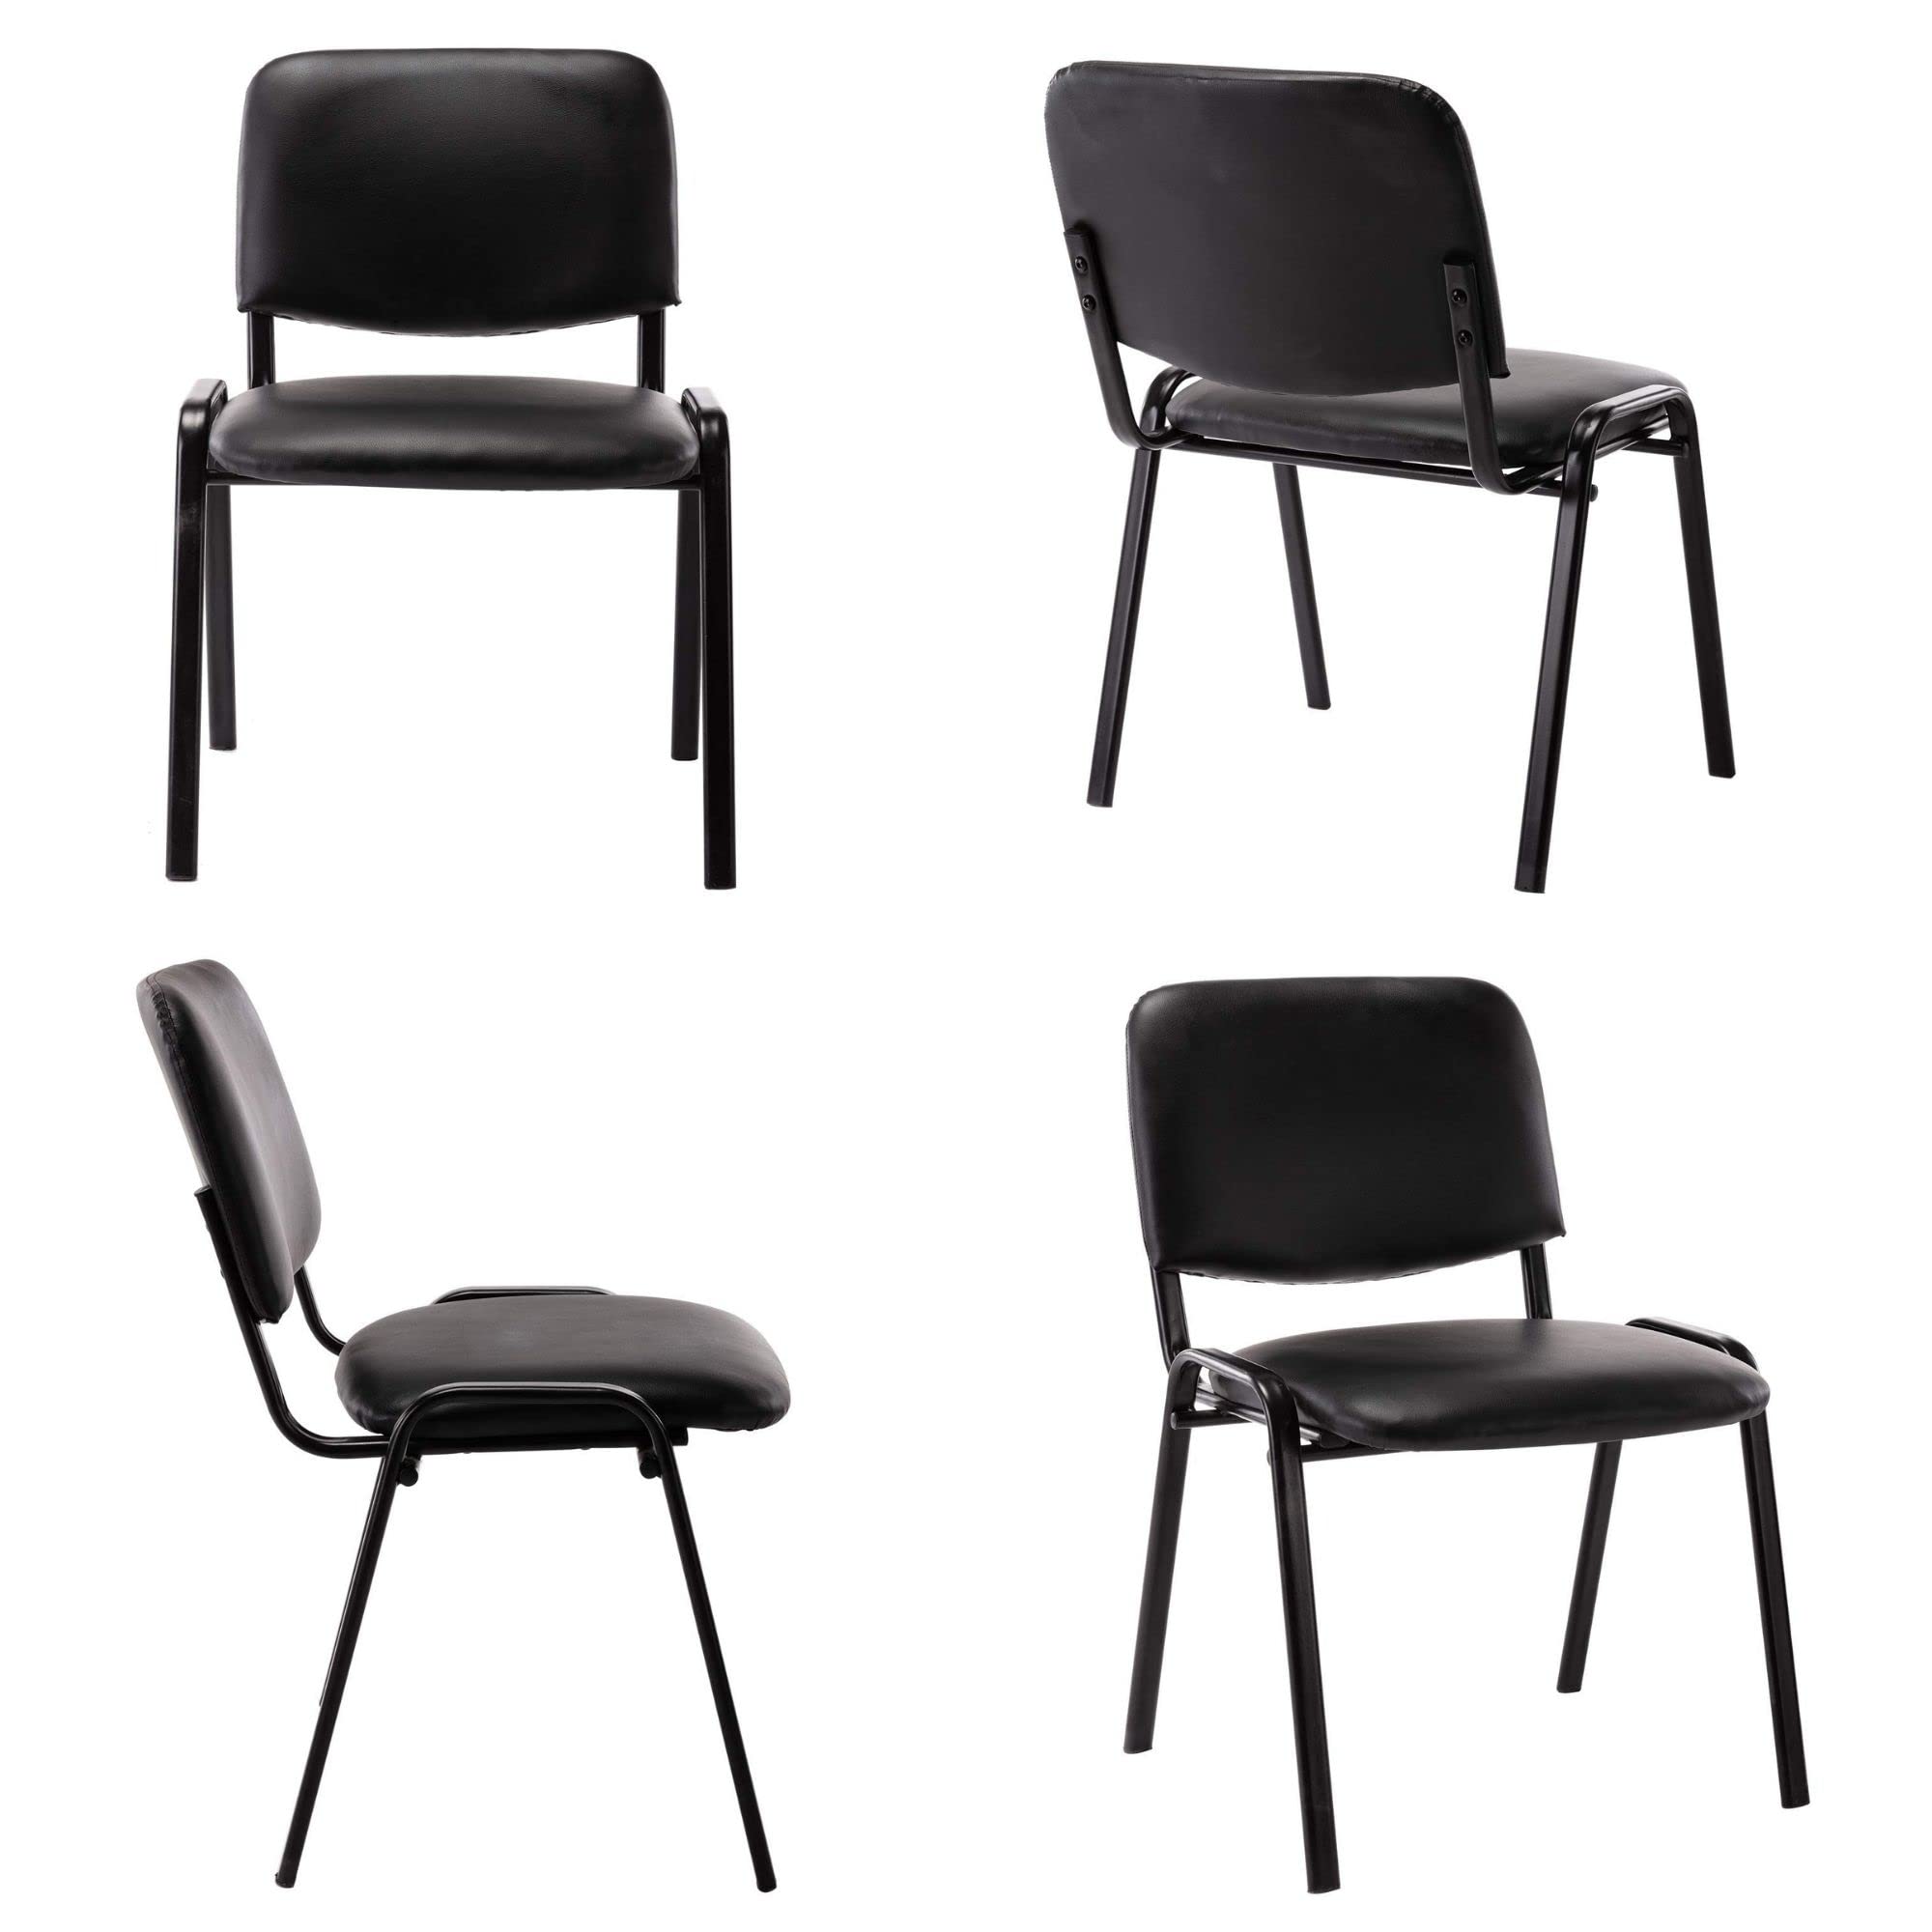 H&Y HEAH-YO Reception Chair Stacking Mesh Armless Office Conference Black Desk Chairs for Guest, Waiting Room, Lobby, Banquet, Events (Cushion-Leather Back)